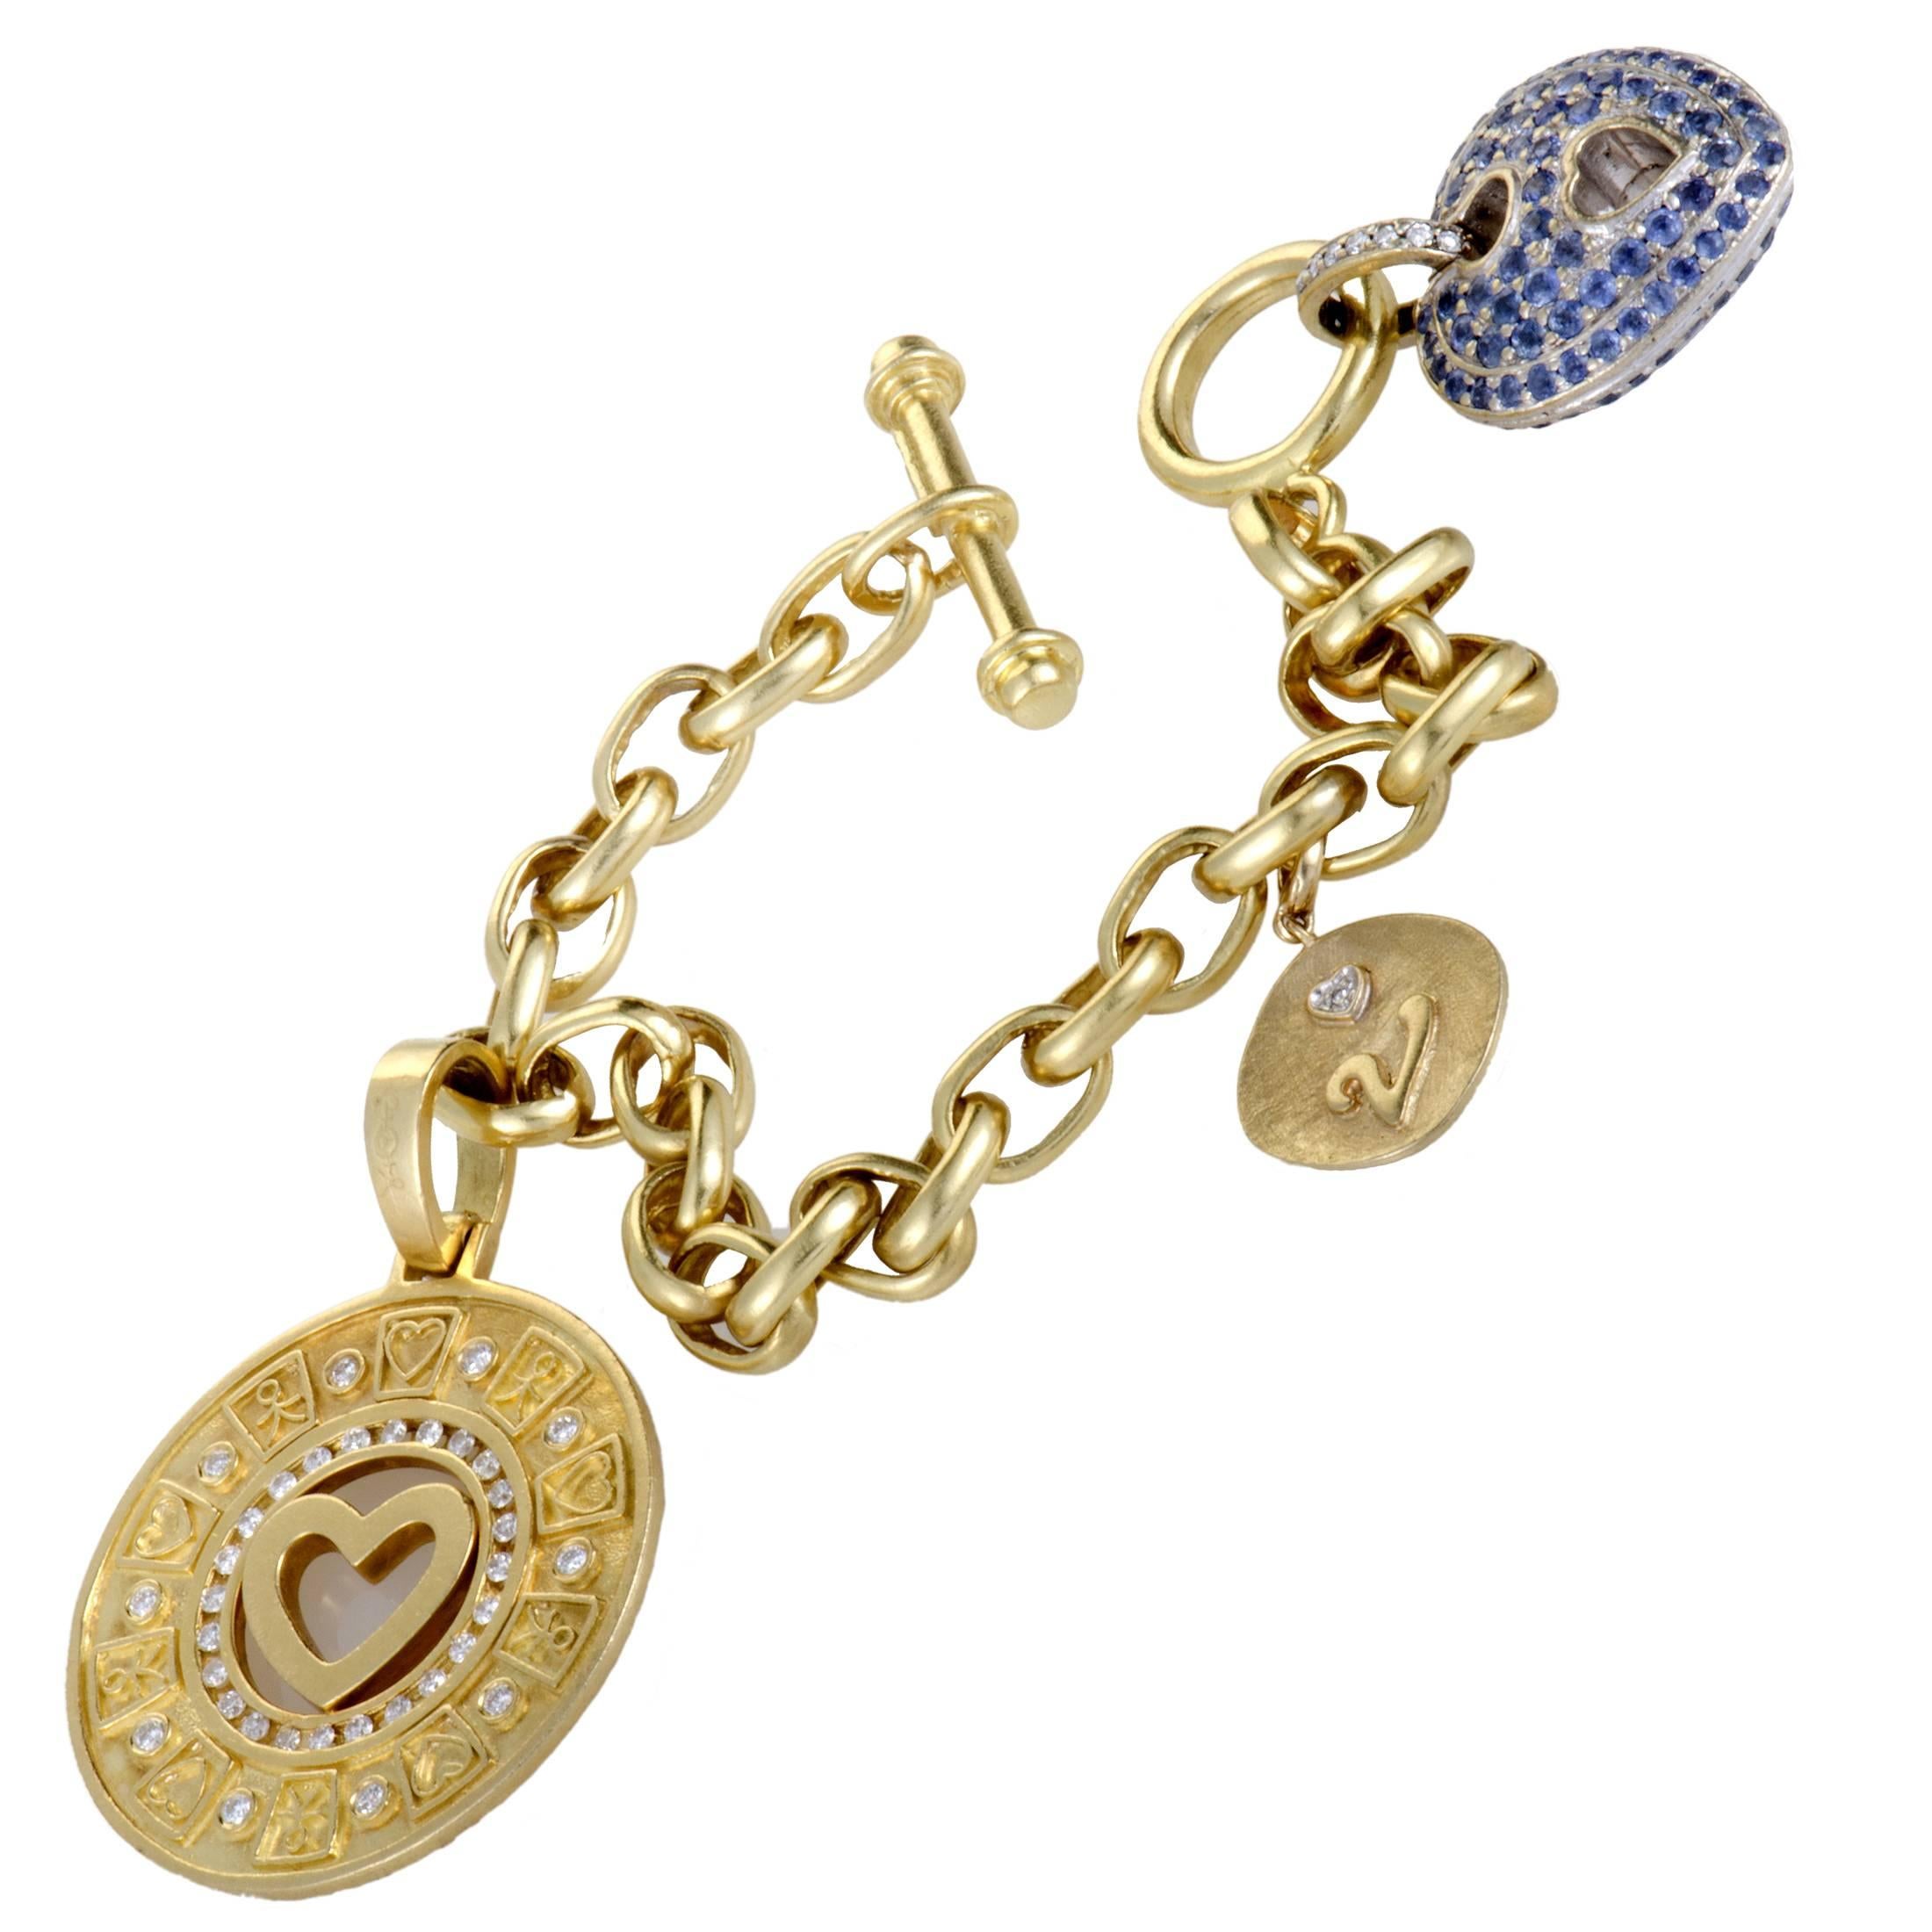 Boasting an incredibly feminine design and alluringly lavish décor, this splendid Marlene Stowe bracelet offers an exceptionally graceful, charming appearance. The bracelet is made of 18K yellow and white gold and set with a plethora of sapphires